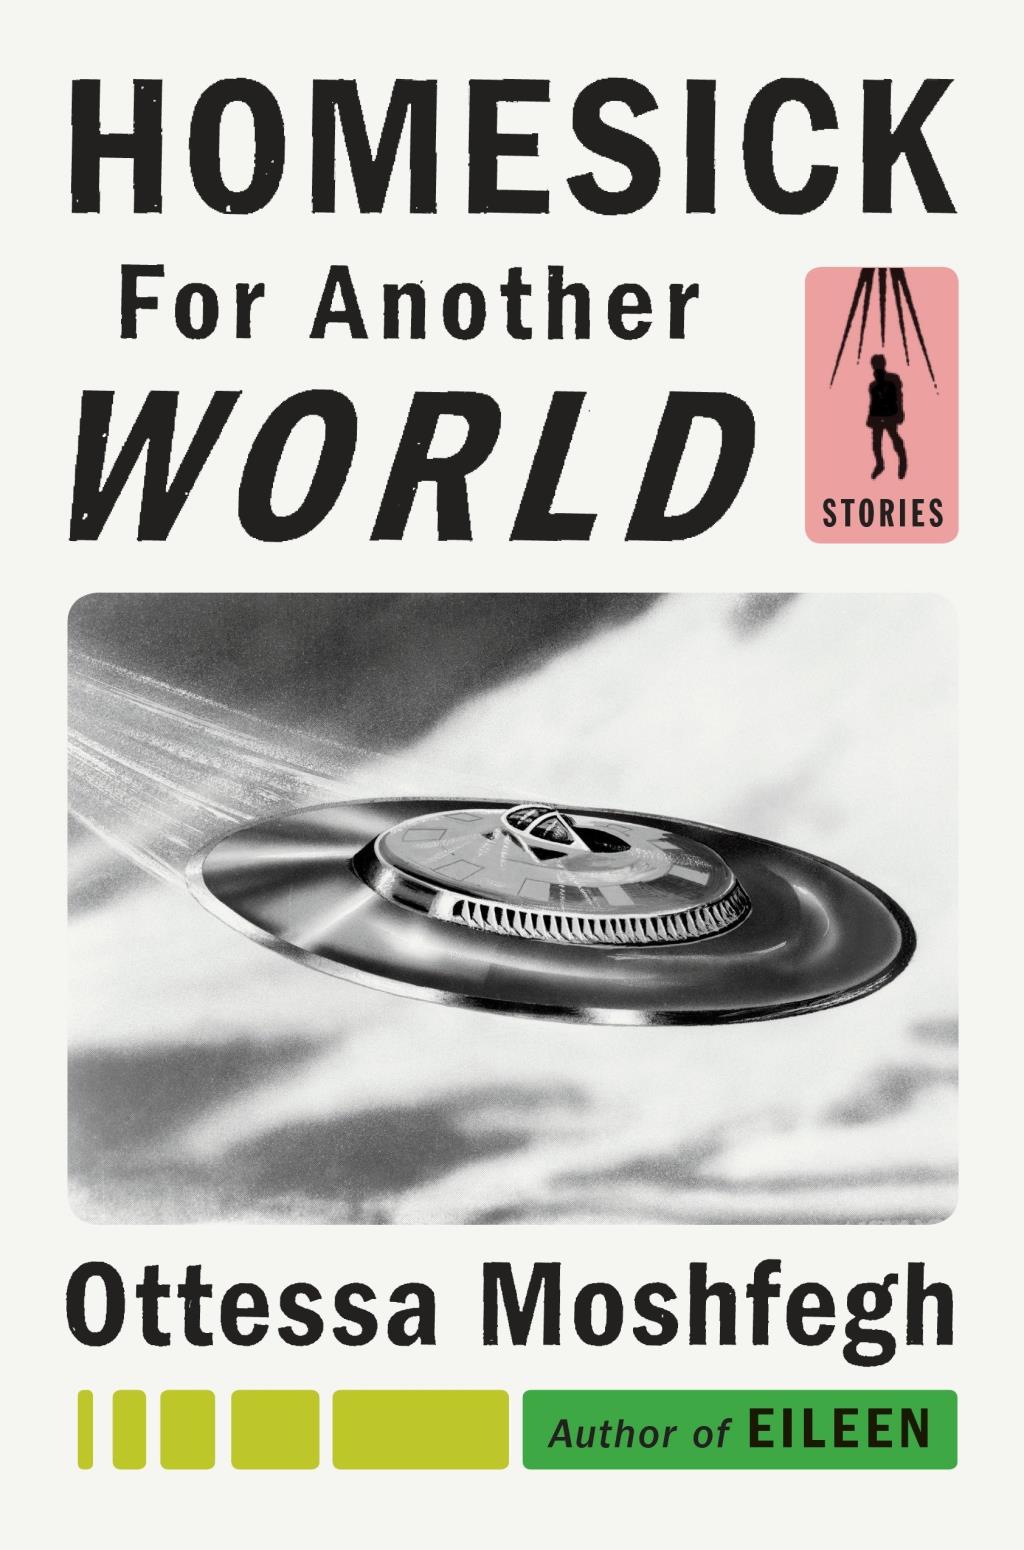 Homesick for another world book cover